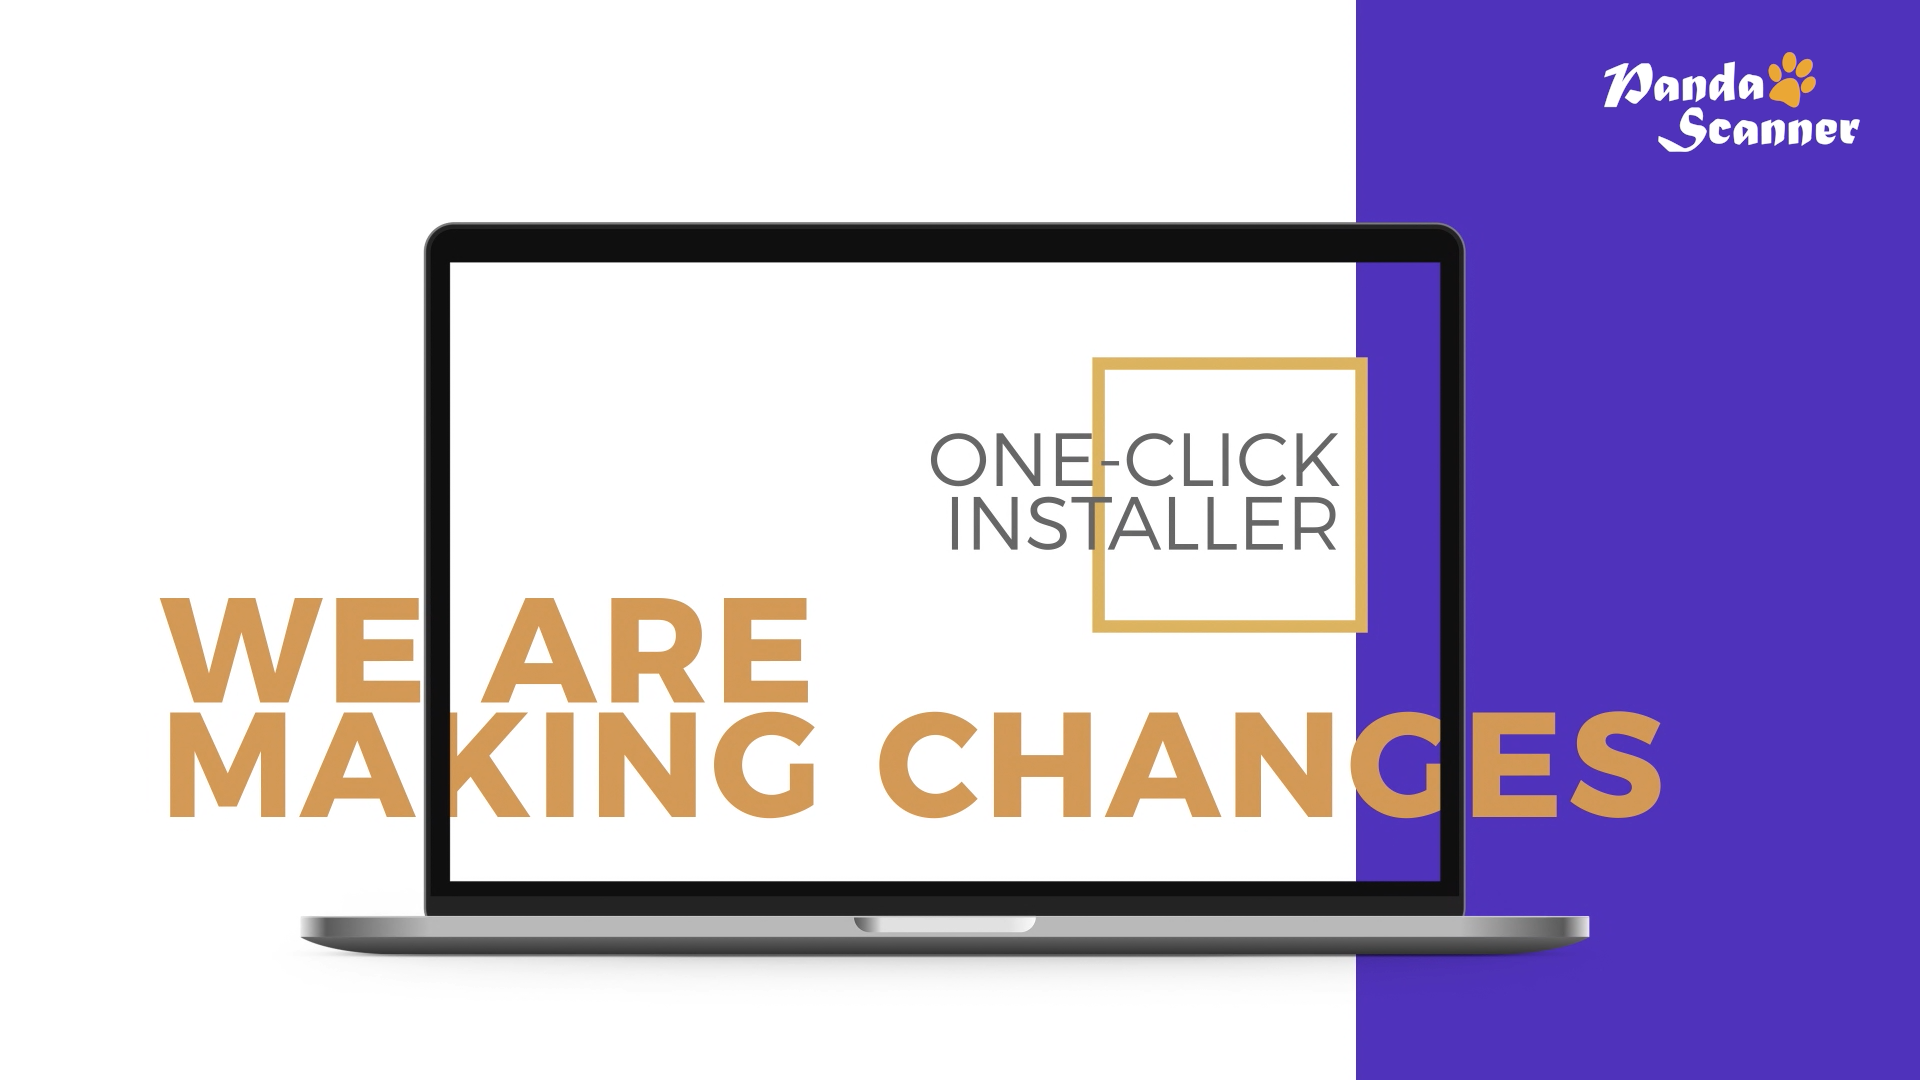 One-Click Installer is Now Available to All Customers